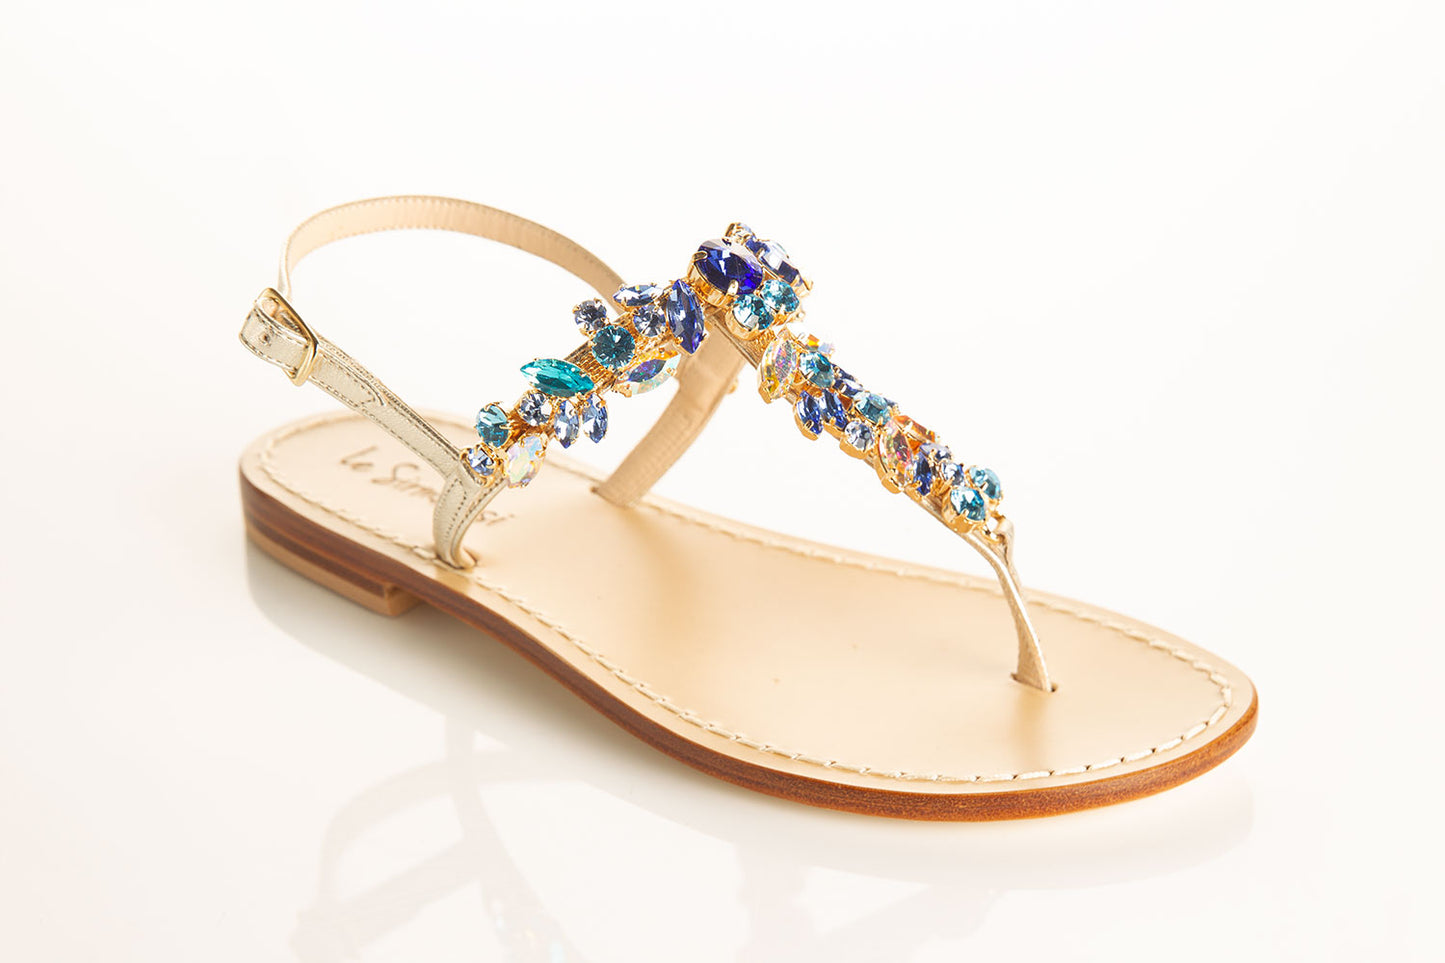 flat sandals with aqua Swarovski crystals, luxury sandals with crystal embellishment, Tuscan leather sandals, stylish thong strap sandals, comfortable flat sandals